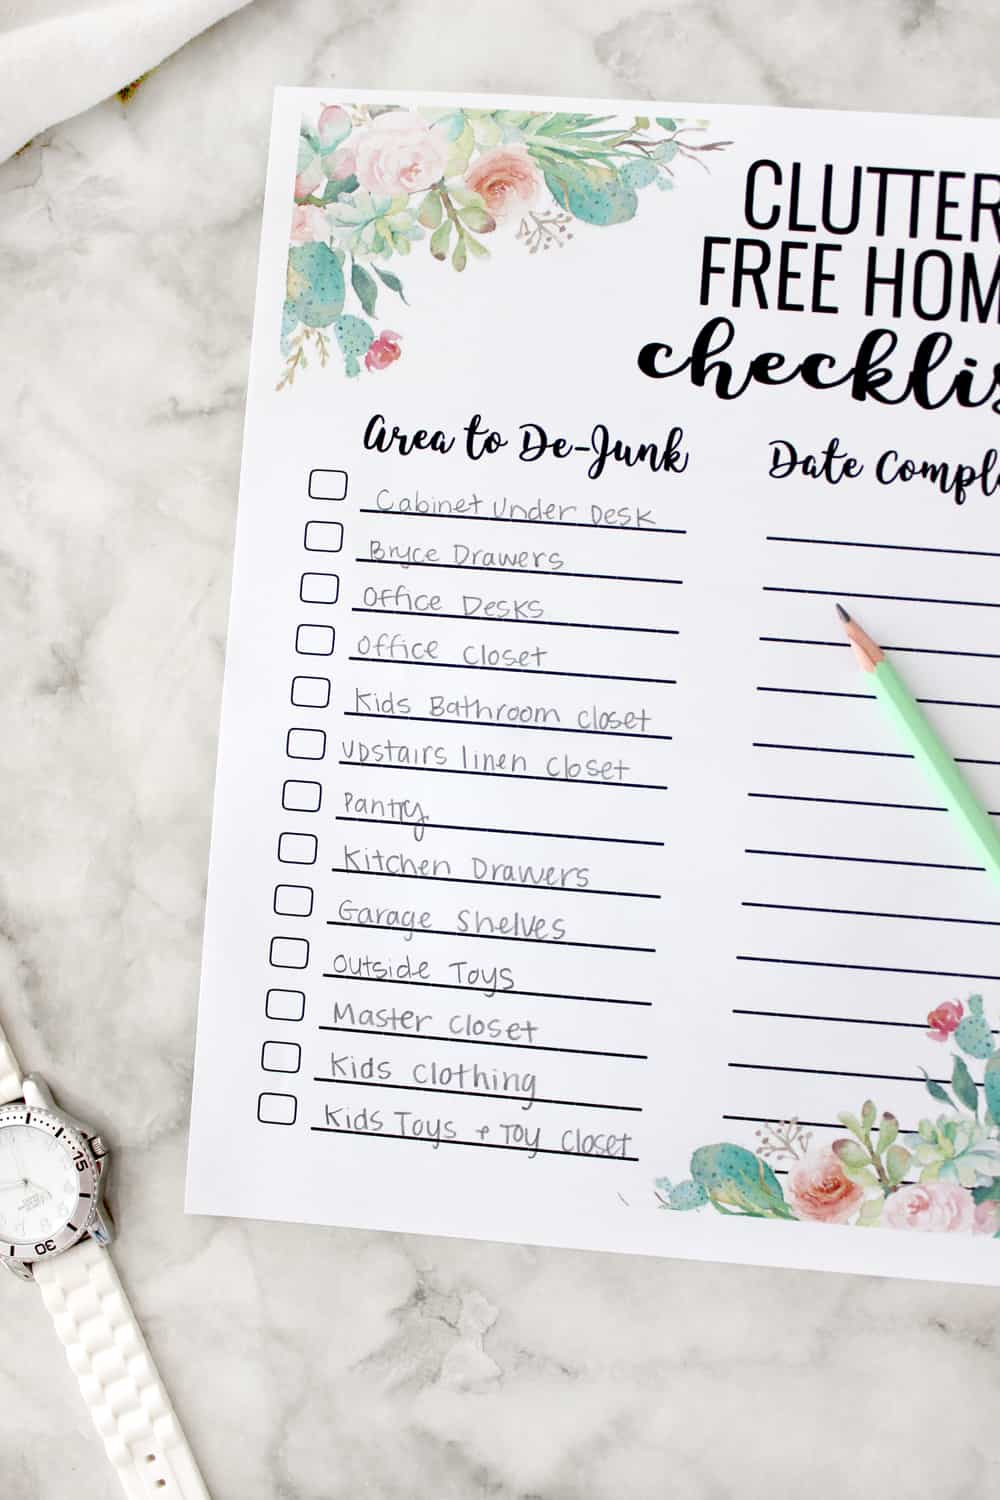 I love this clutter free home checklist! A perfect way to organize and declutter a little at a time until your house is perfectly functional and organized! 